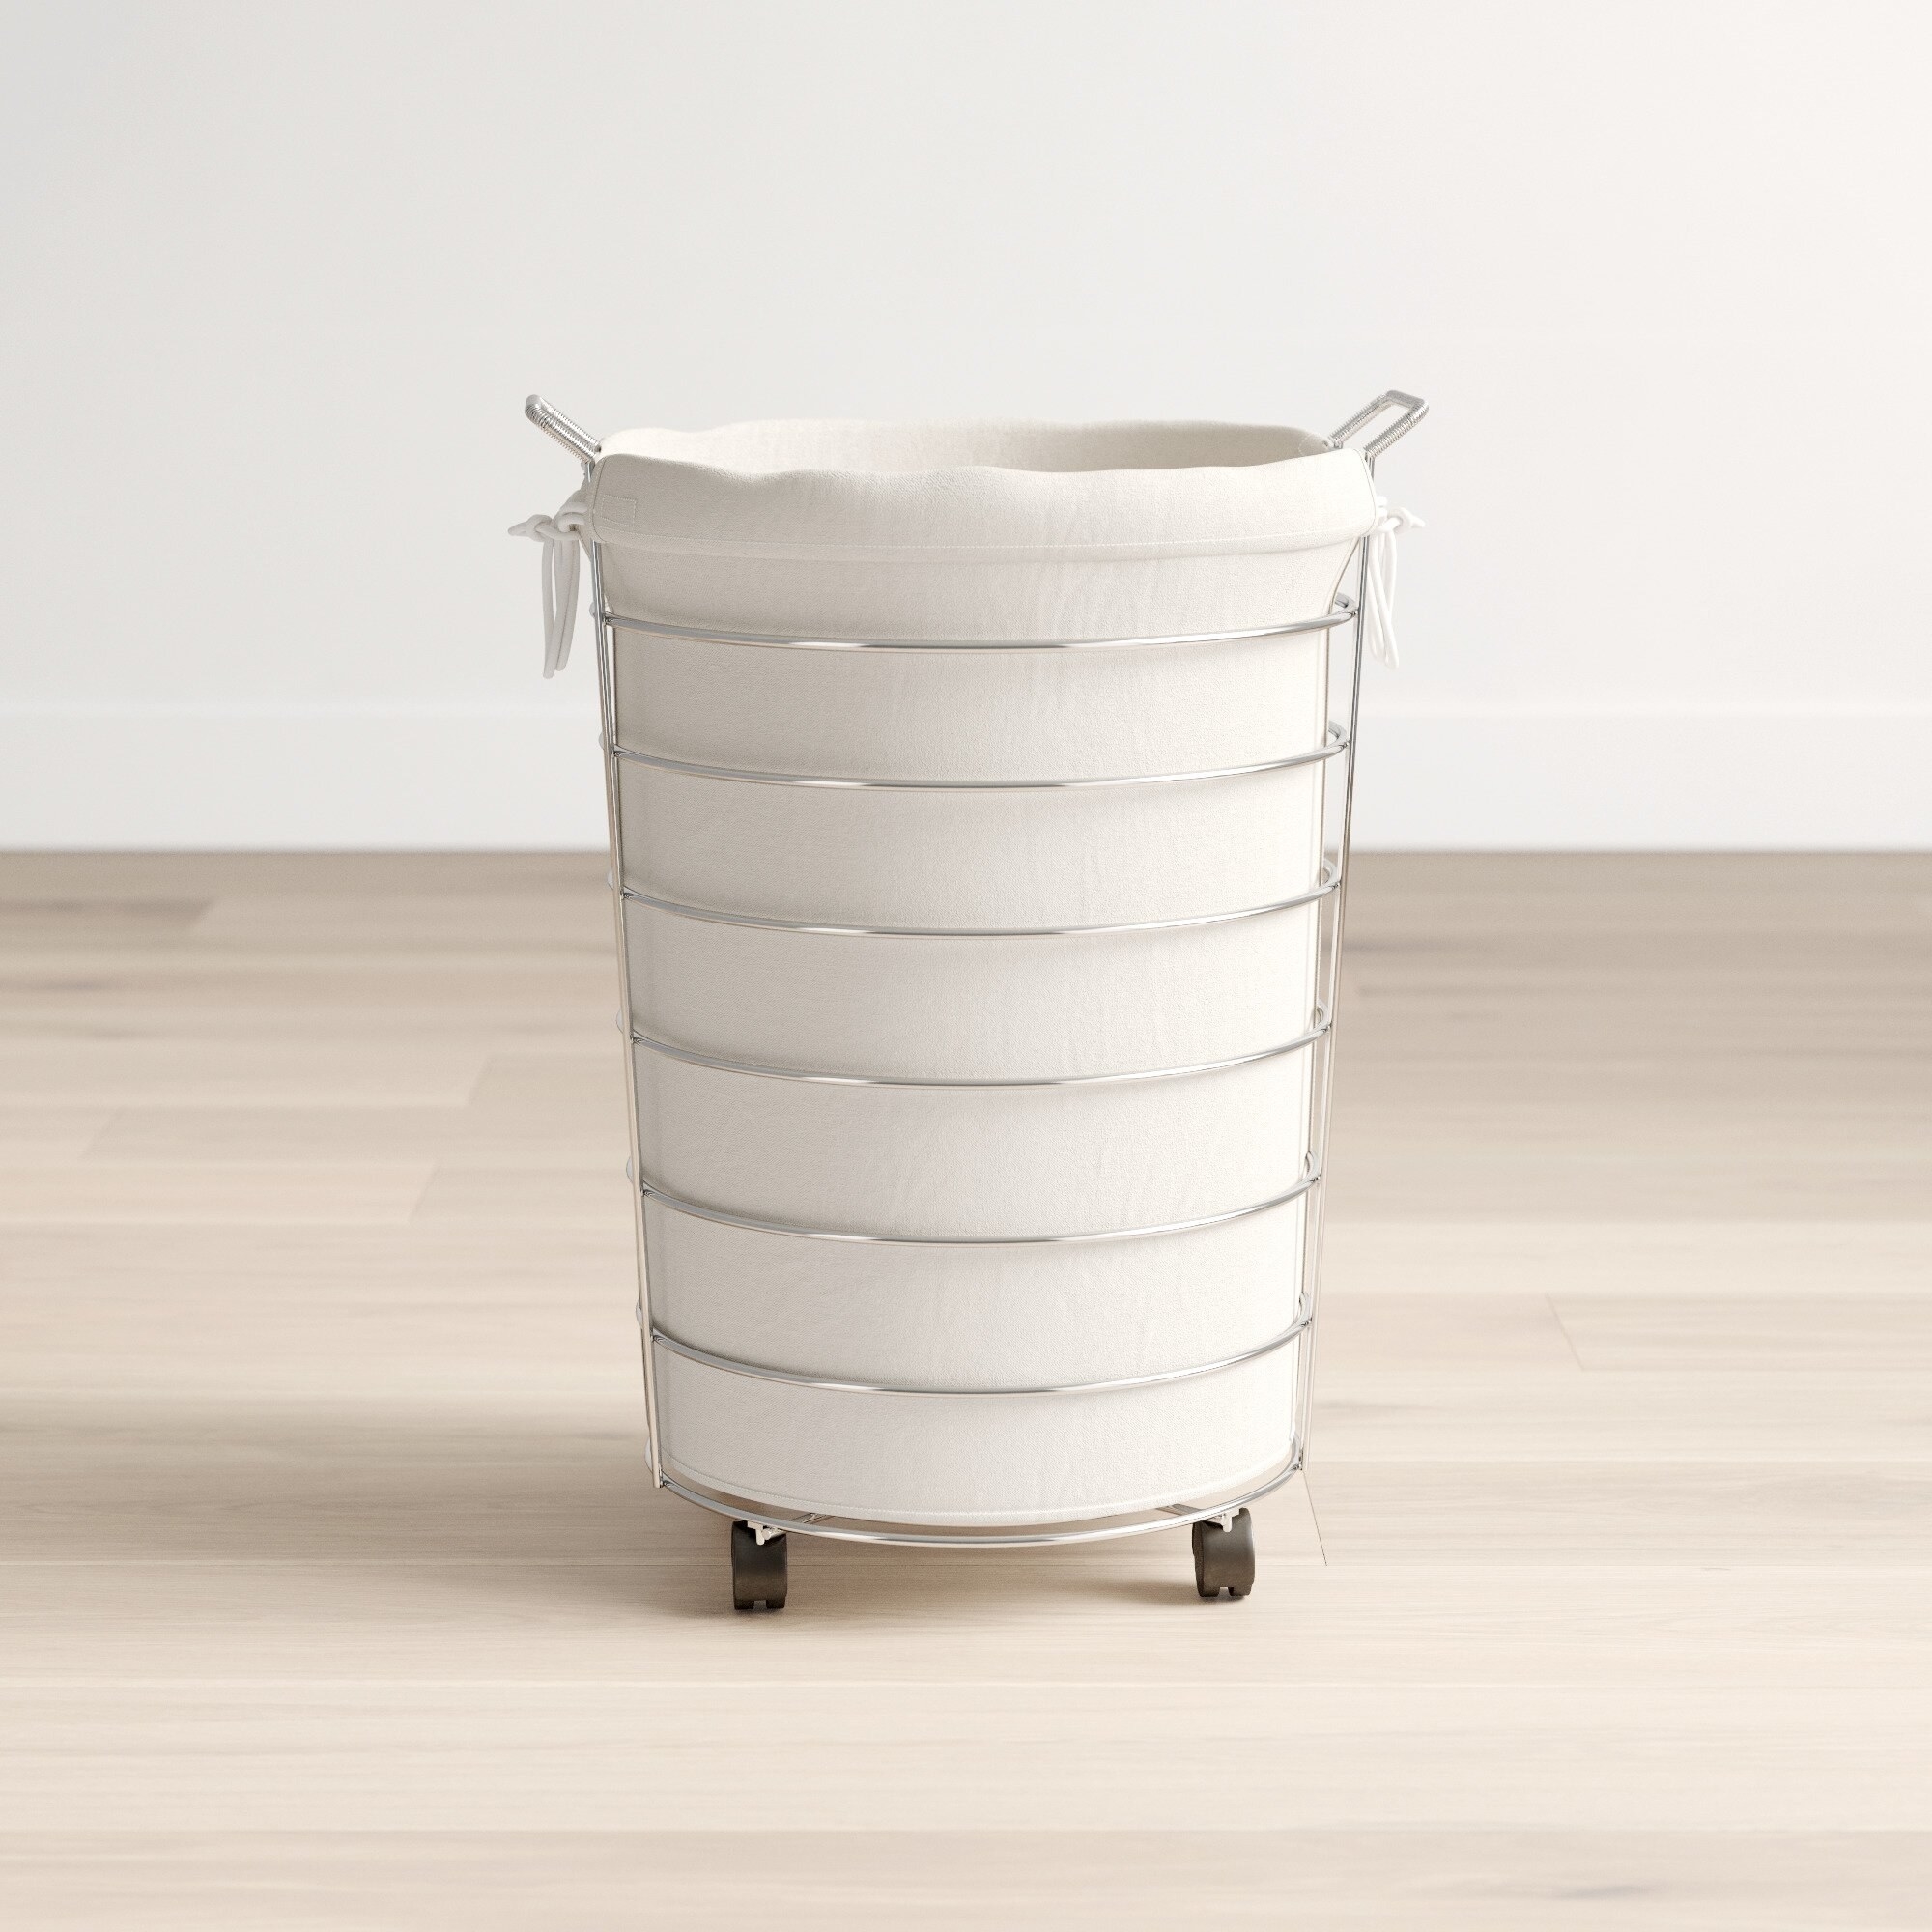 A metallic chrome skeleton hamper with a visible canvas bag on wheels